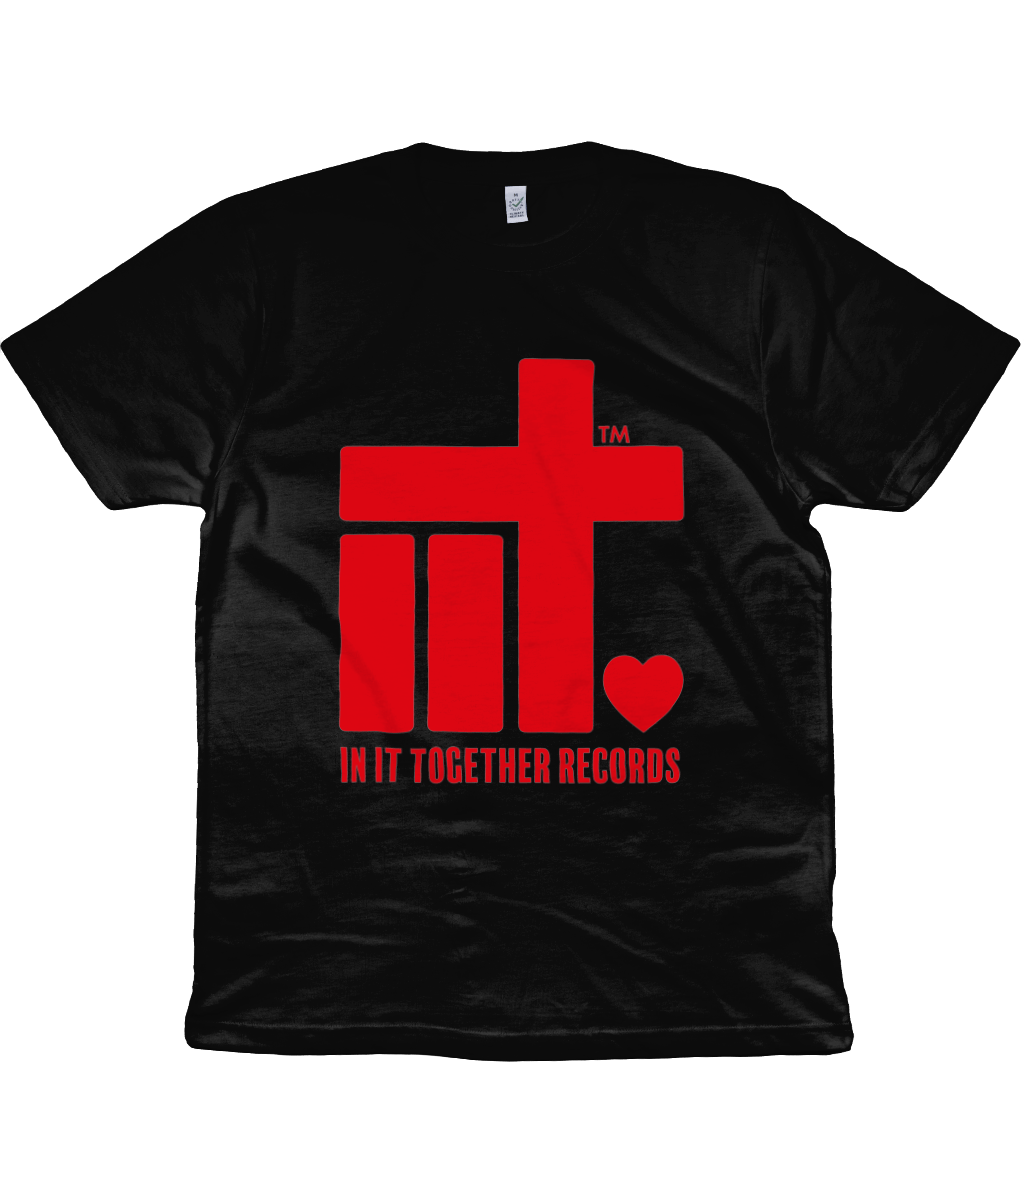 T-Shirt IIT Records Red